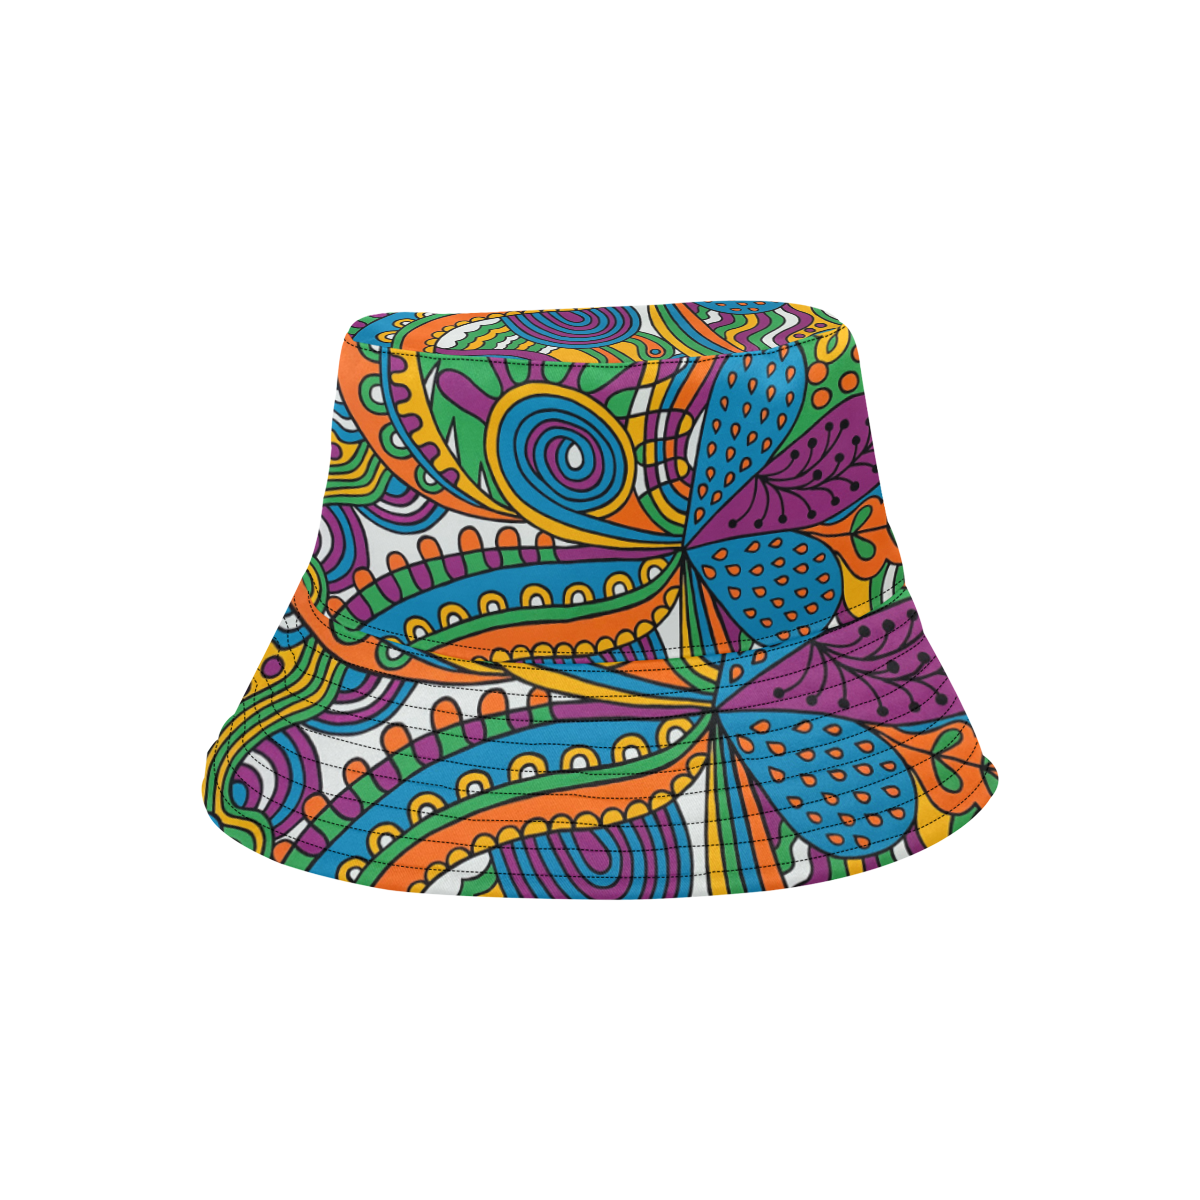 Wuvi19 All Over Print Bucket Hat